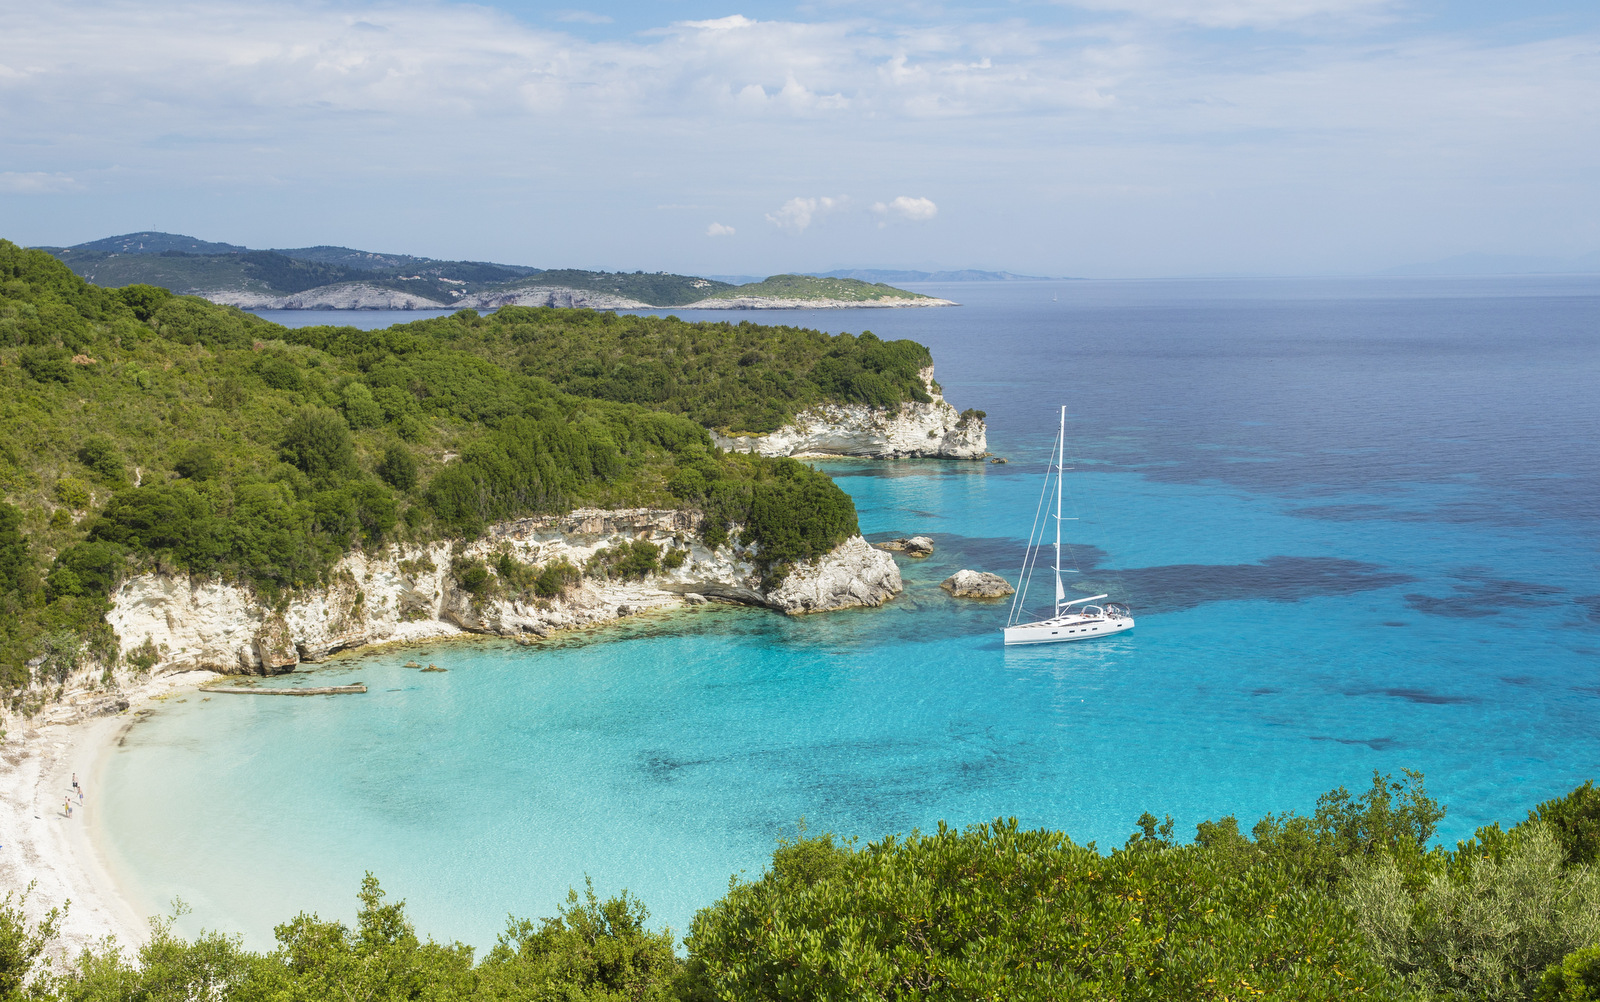 luxury sailing yacht Argentous Yacht moored in Emerald Bay, Paxos